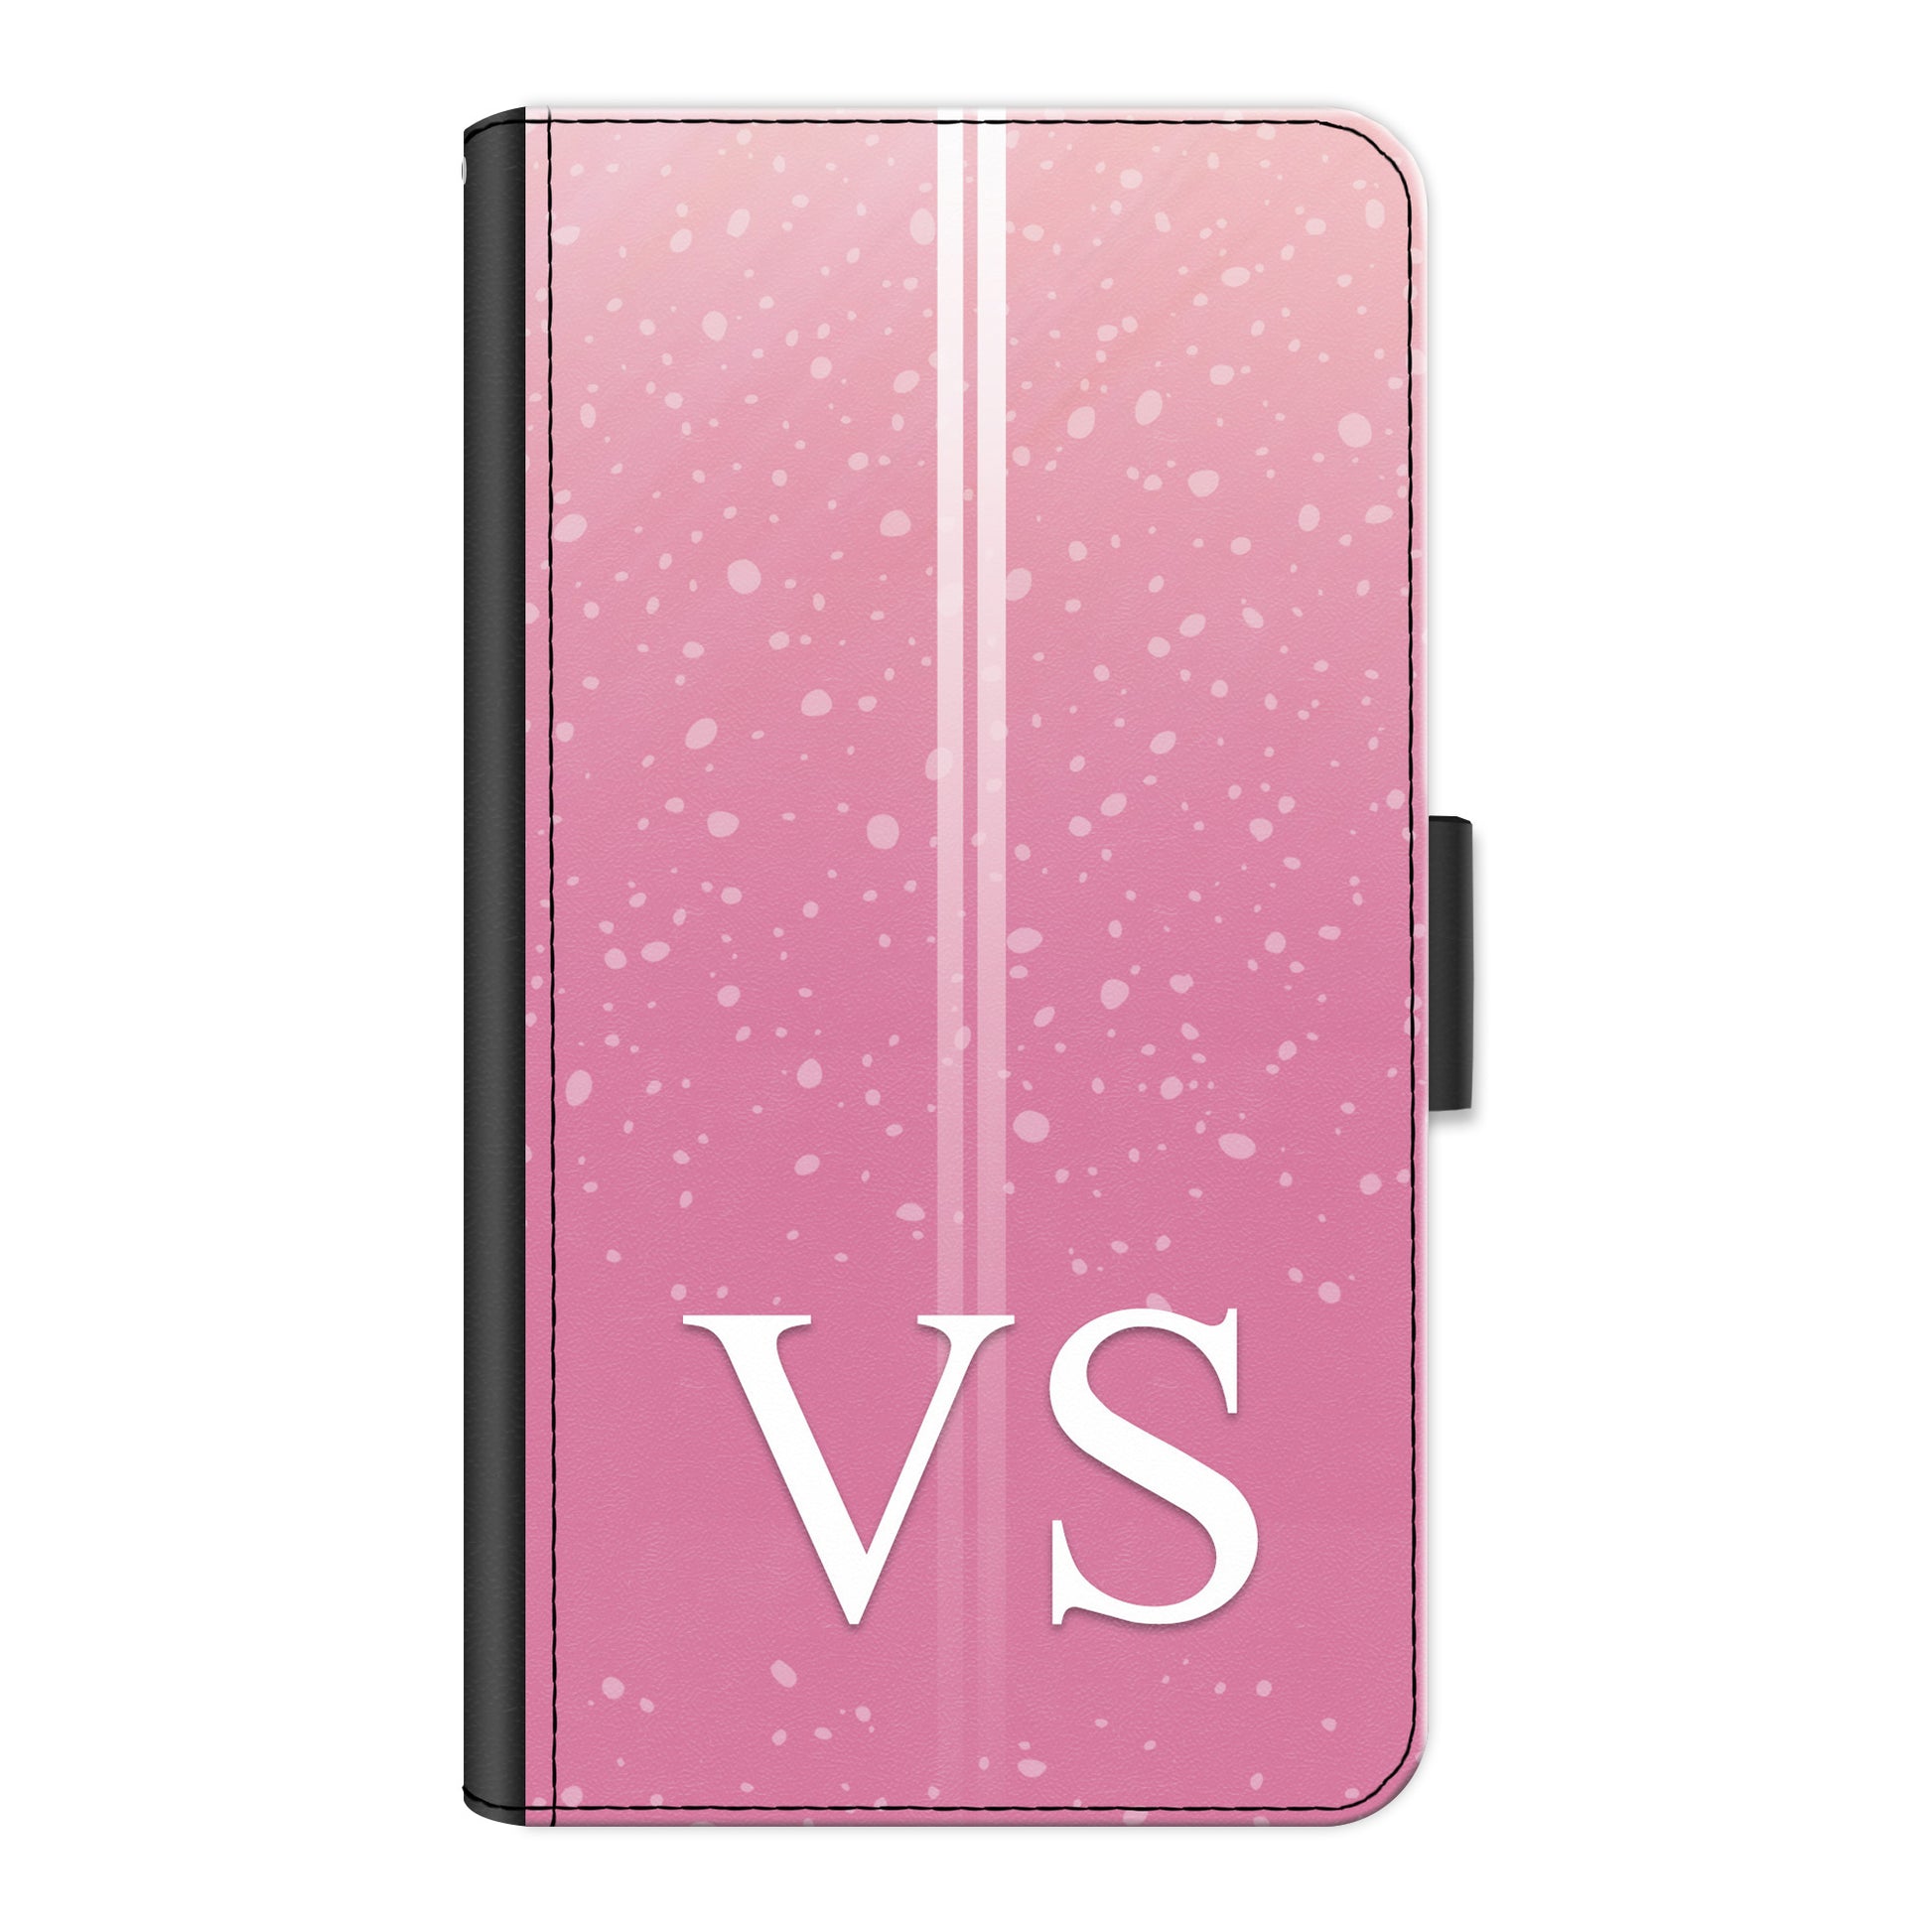 Personalised Honor Phone Leather Wallet with White Initials, Pin Stripes and Droplets on Pink